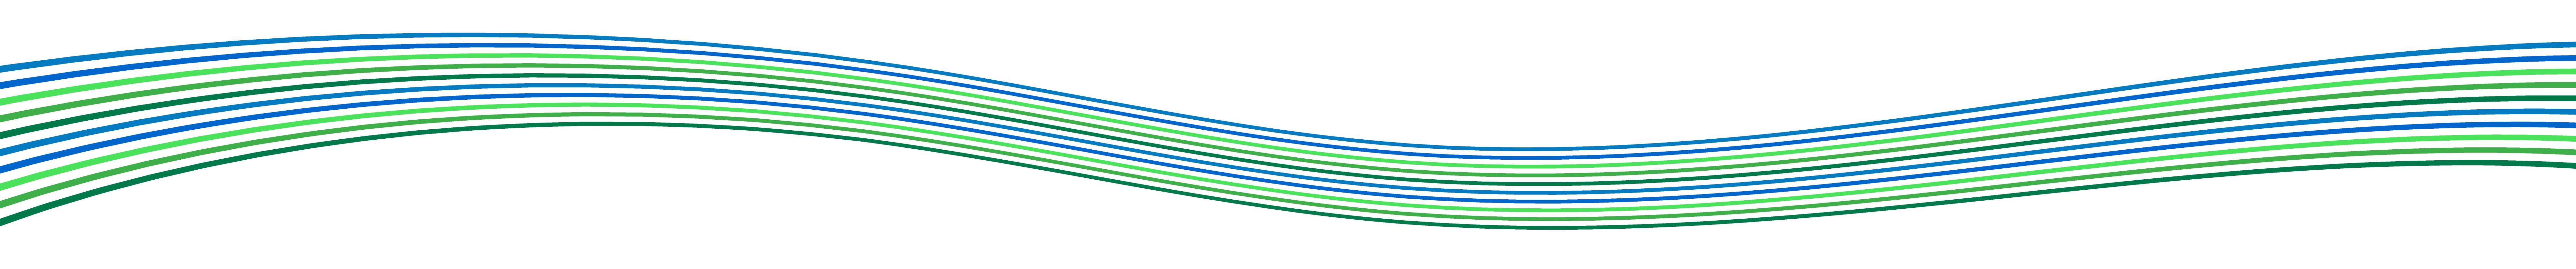 Green and blue striped wavy ribbon.